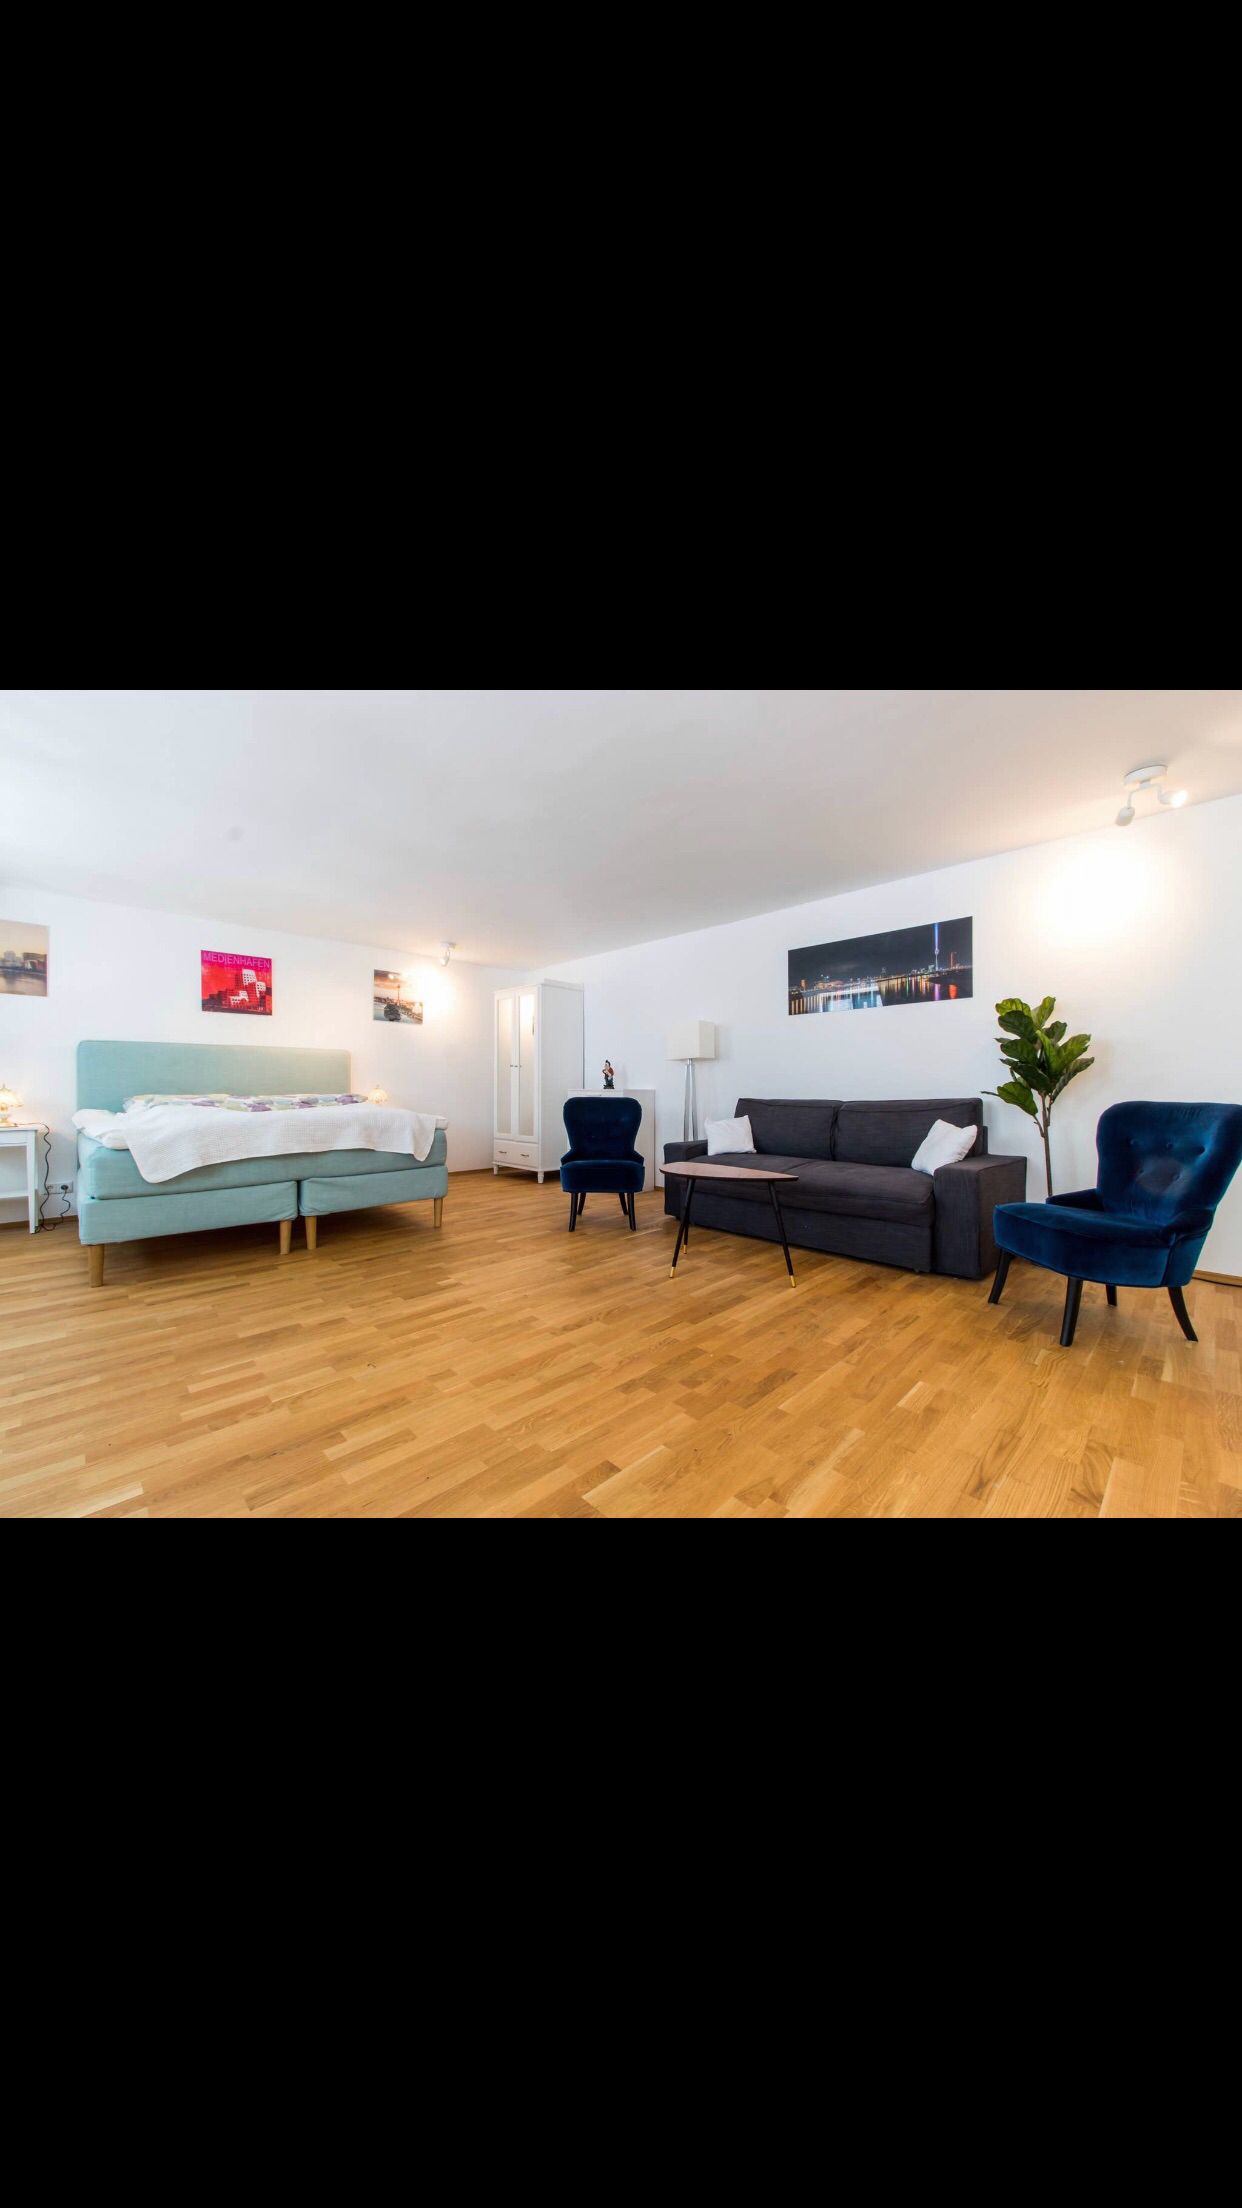 Lovingly furnished apartment with good transport connections in Düsseldorf's old town